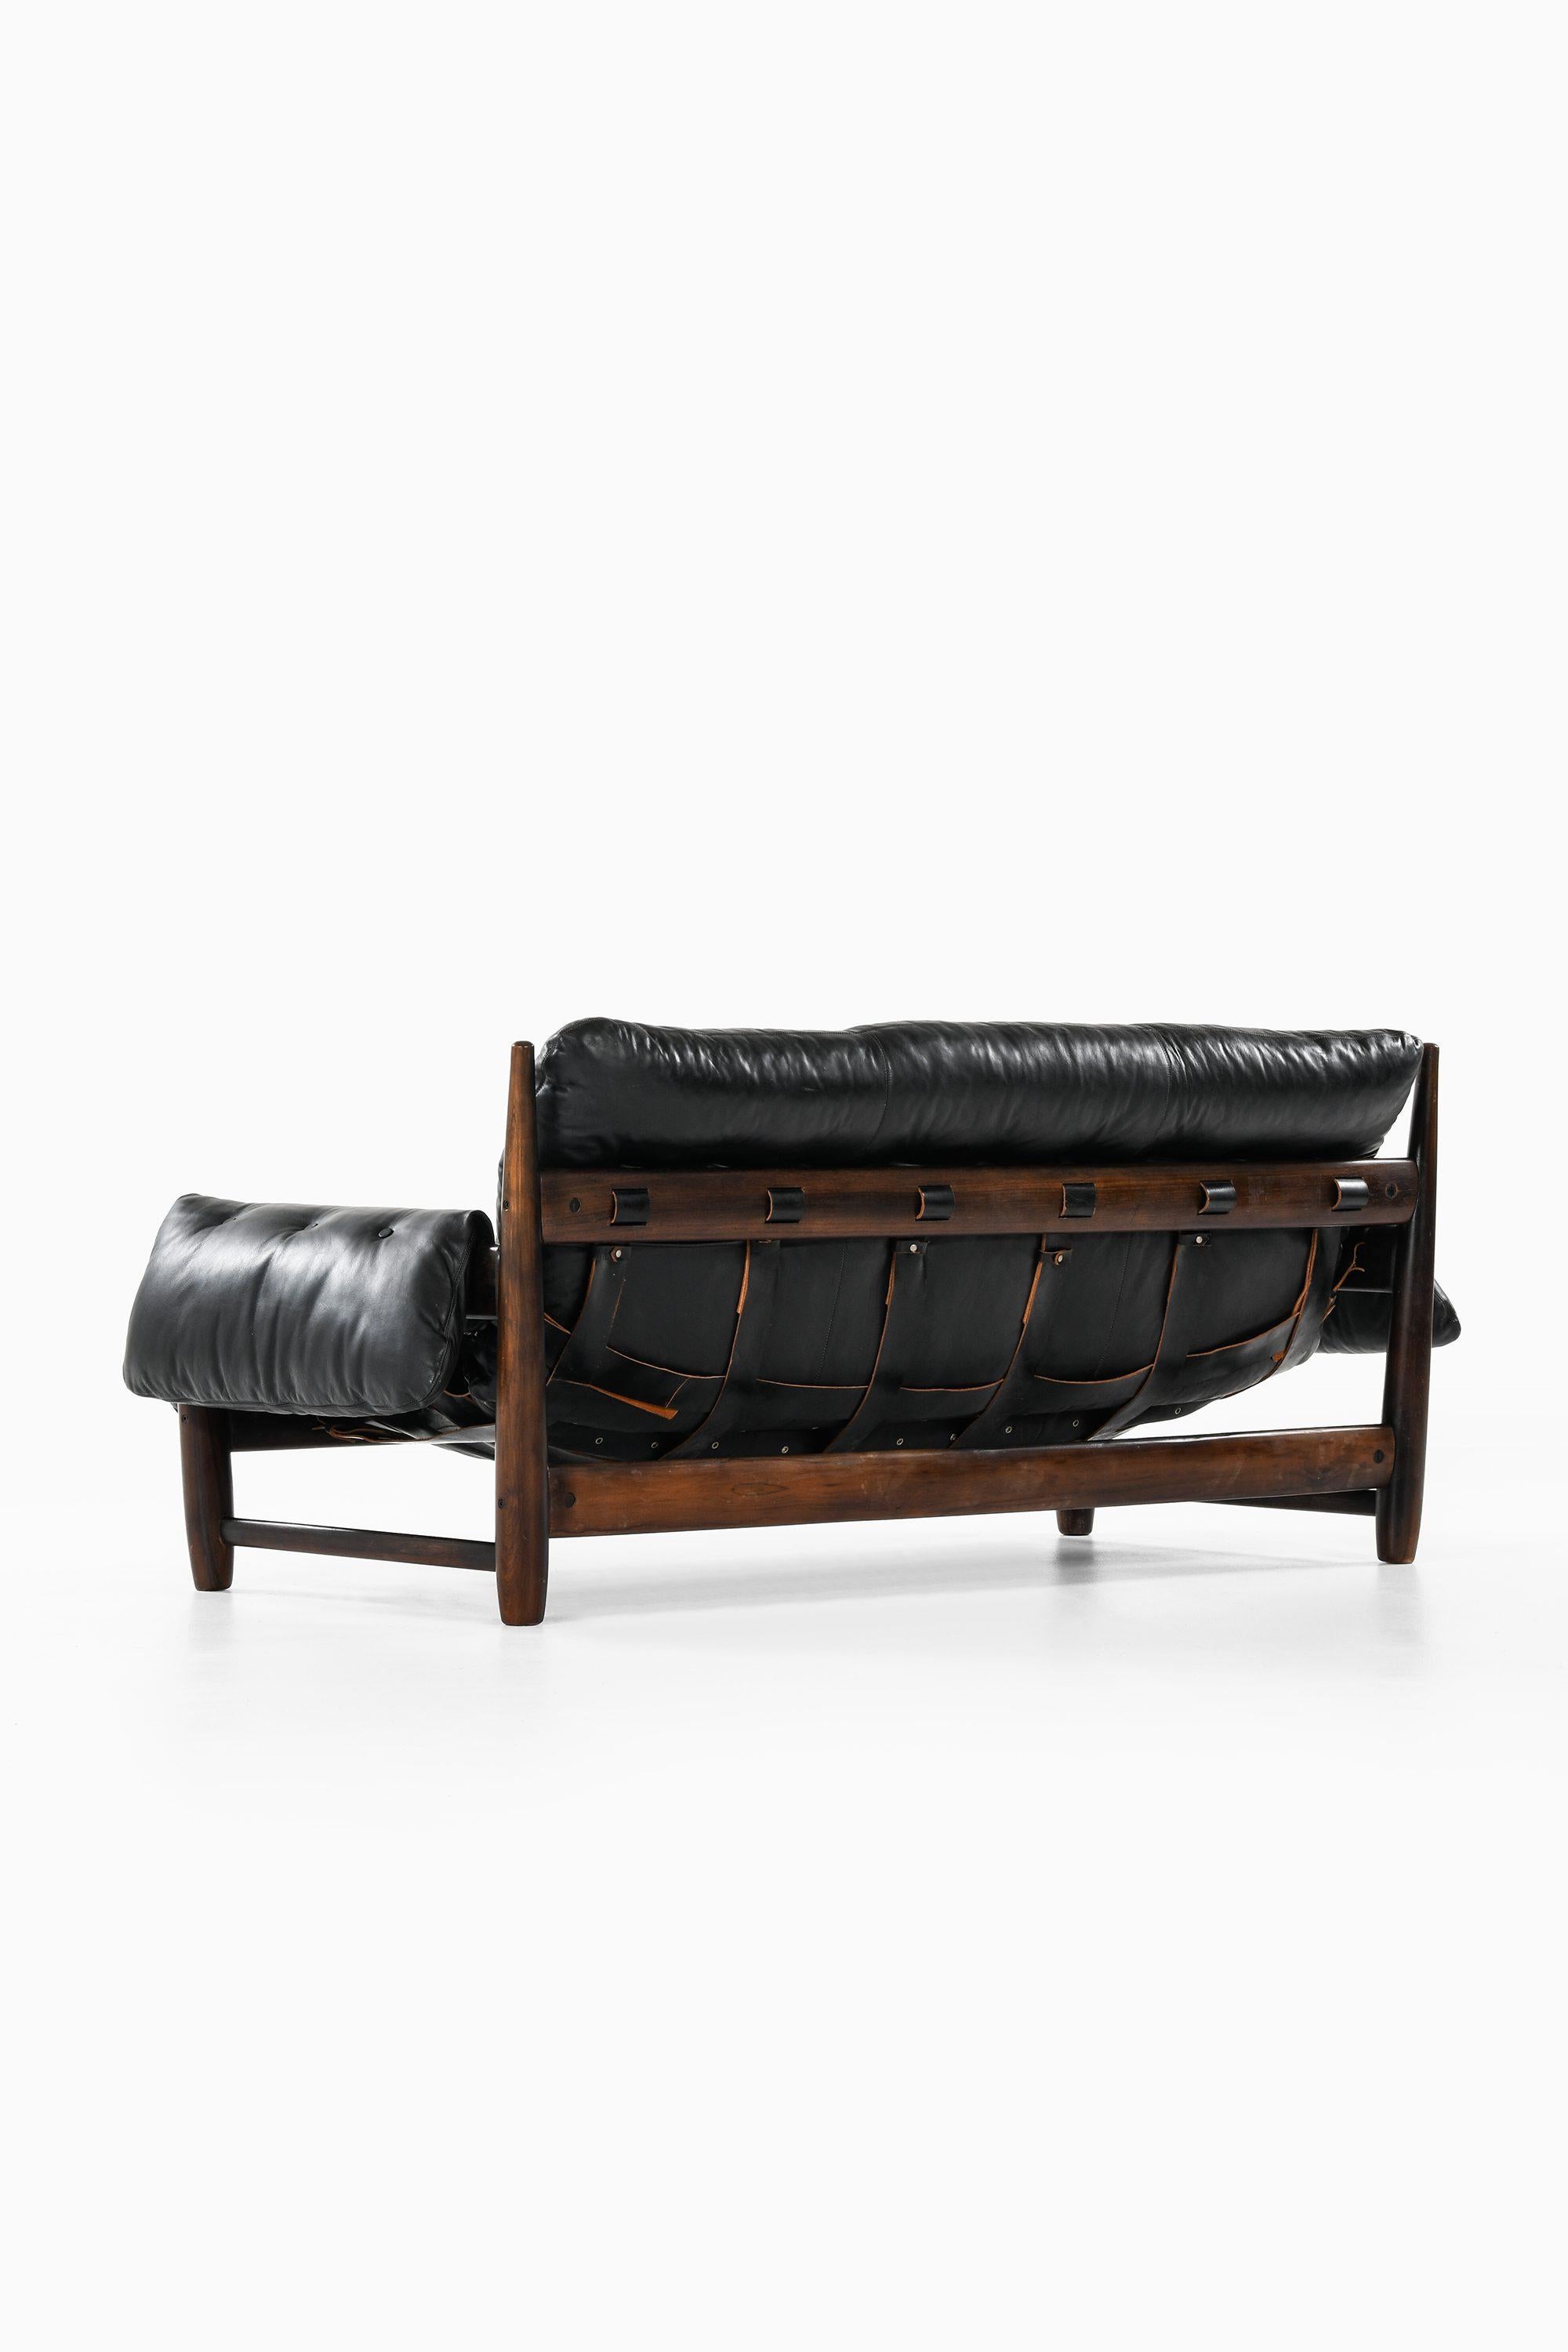 Mid-Century Modern Sofa in Jacaranda and Leather by Sergio Rodrigues, 1957 For Sale